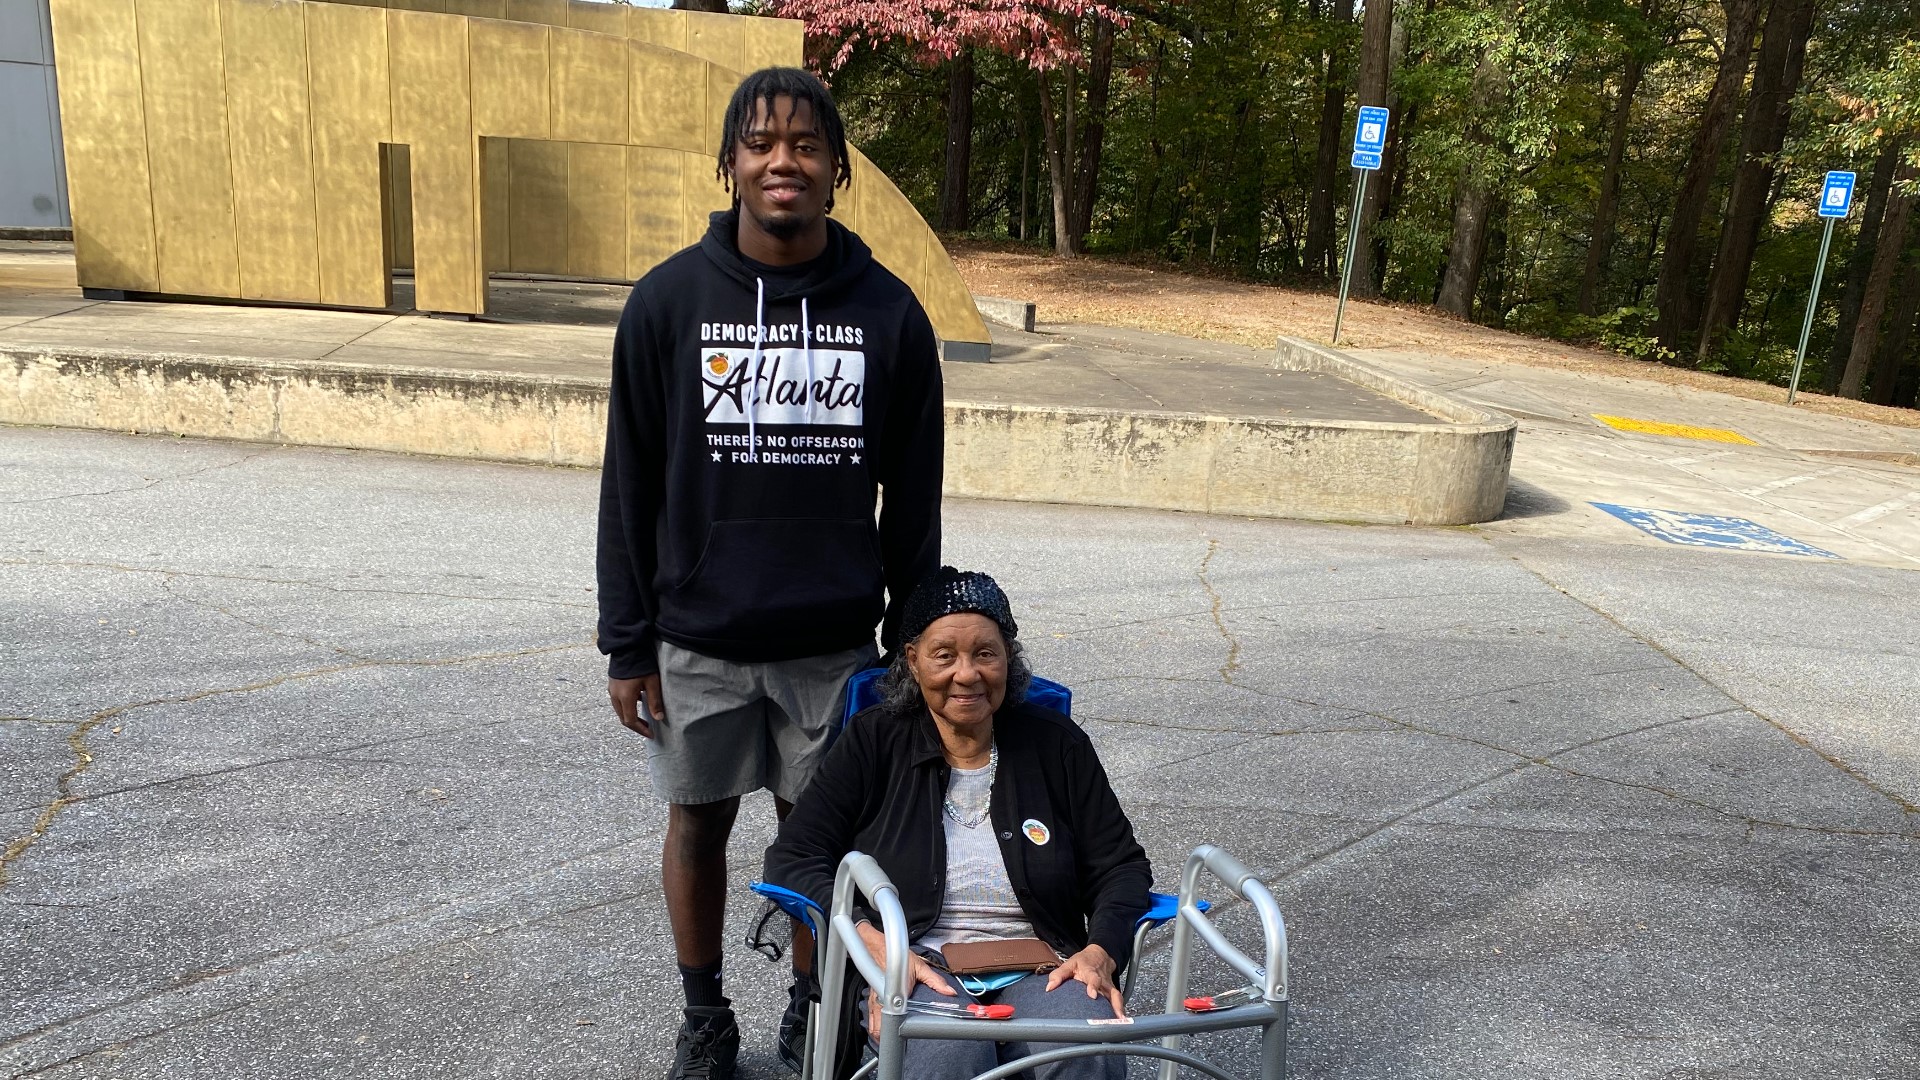 King and Flossie think they might be the youngest and oldest pair voting in Atlanta Tuesday.